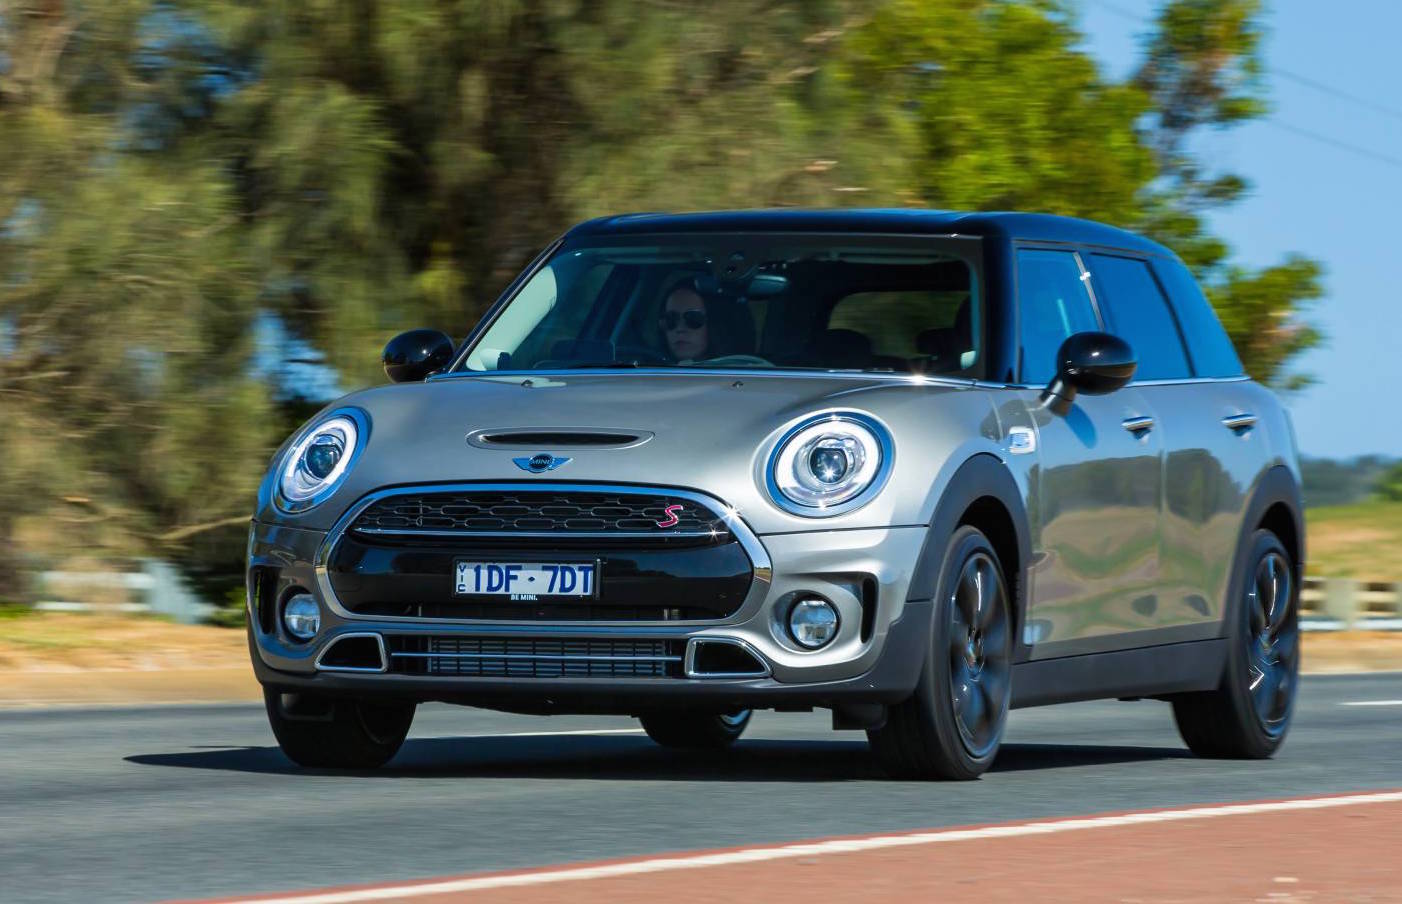 MINI Clubman JCW super hatch on the way, as Focus RS rival – report